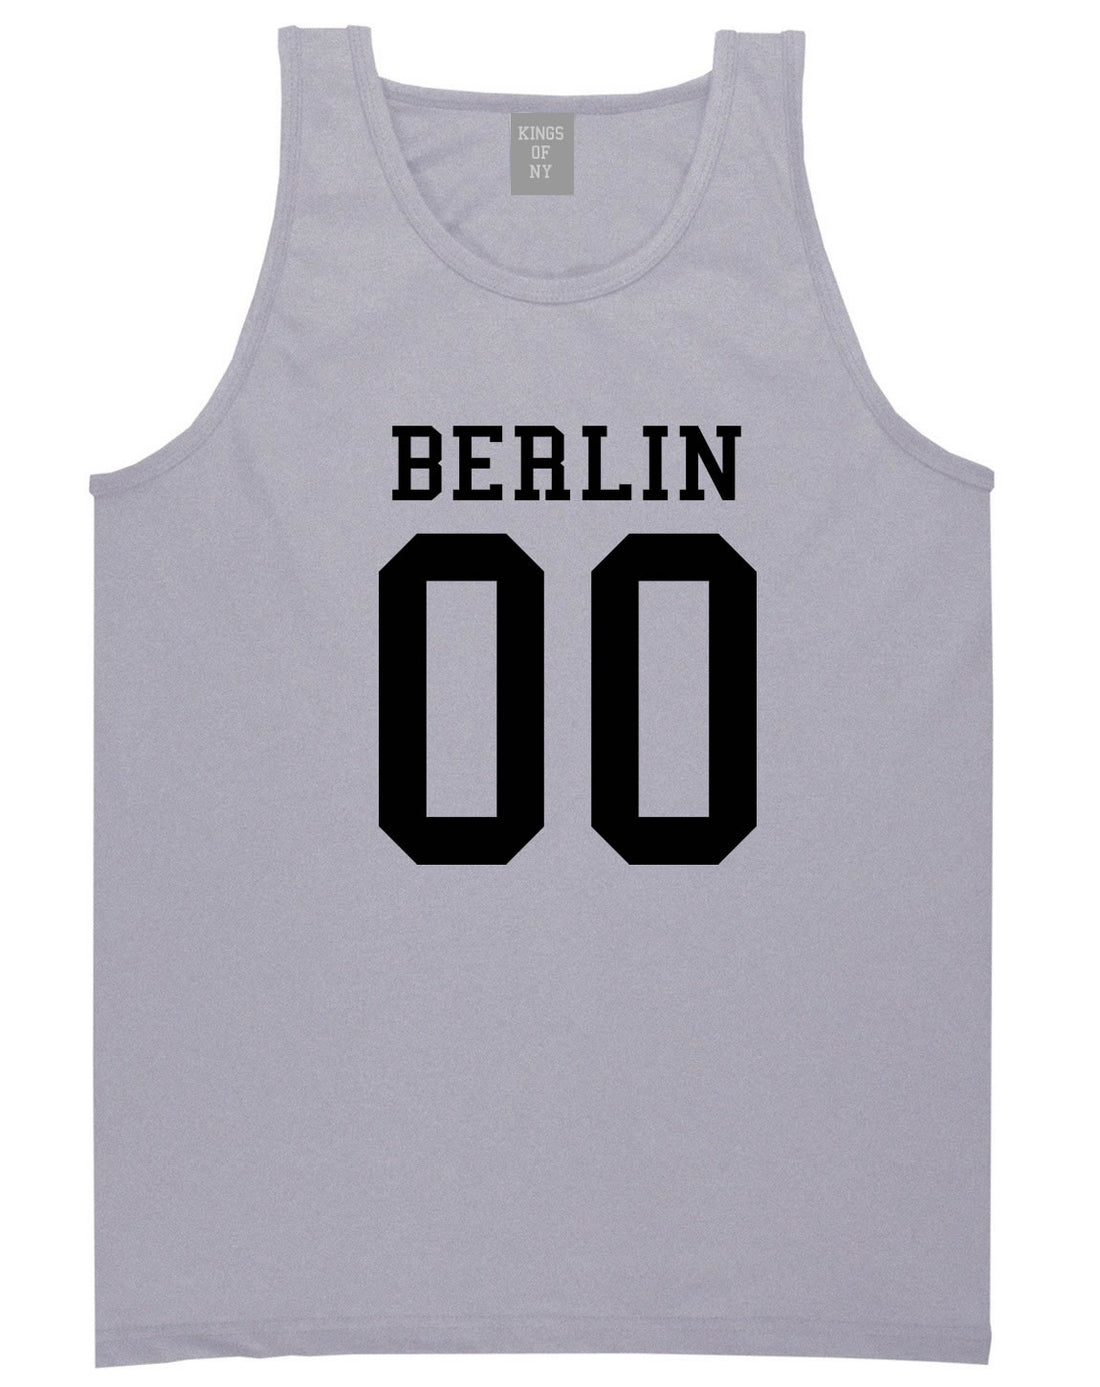 Berlin Team Jersey Germany Country Tank Top in Grey By Kings Of NY